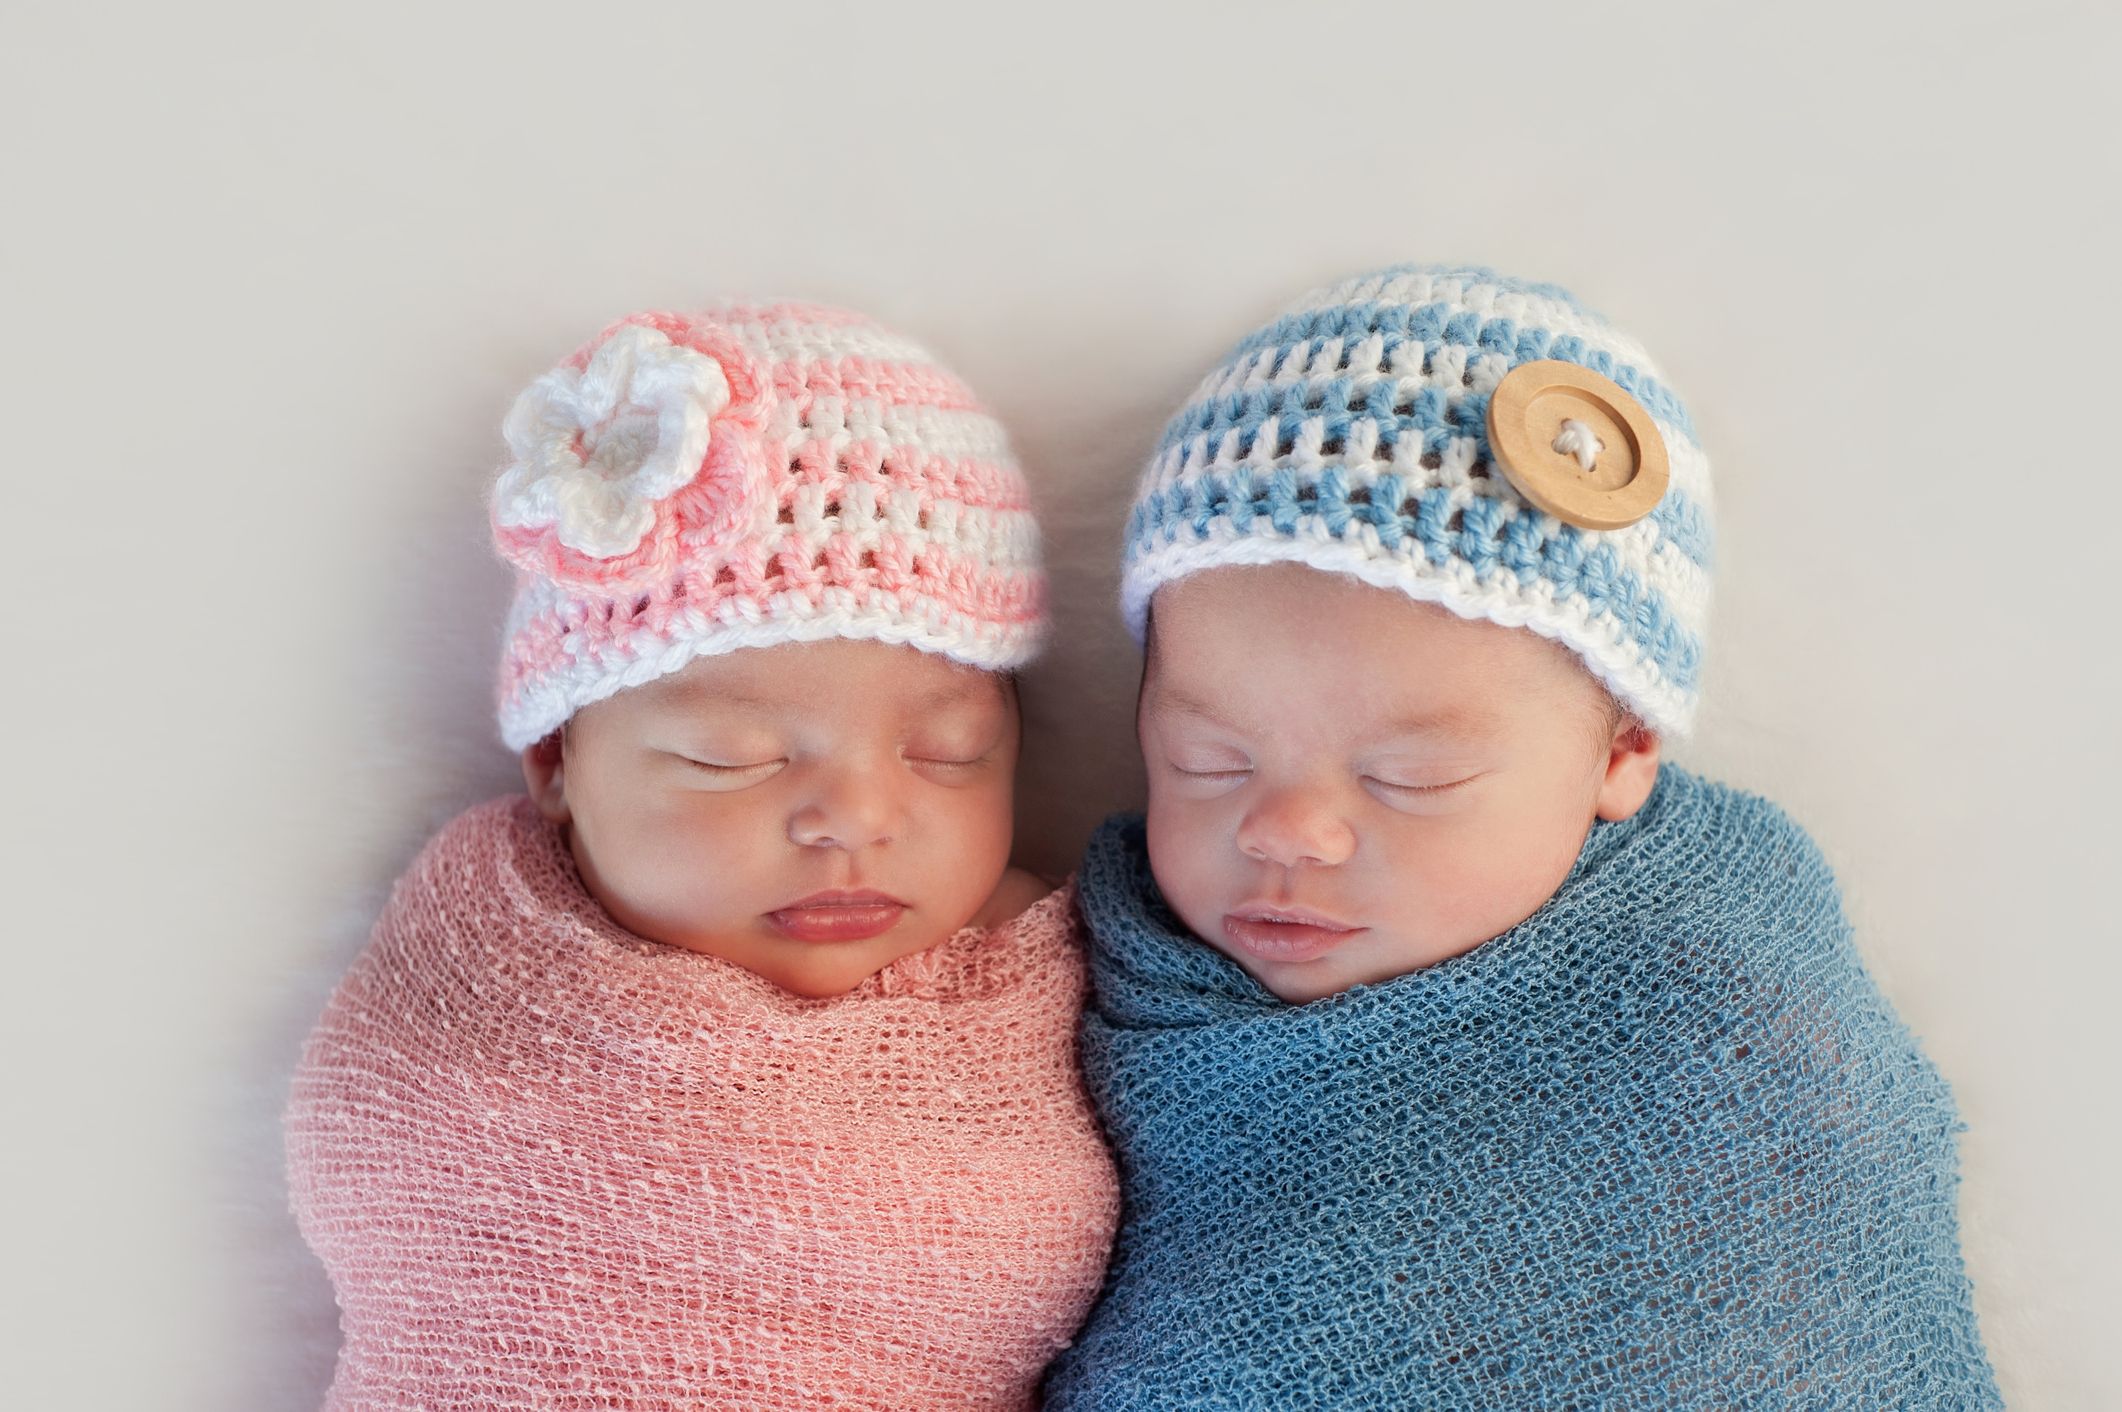 cute baby names for twins